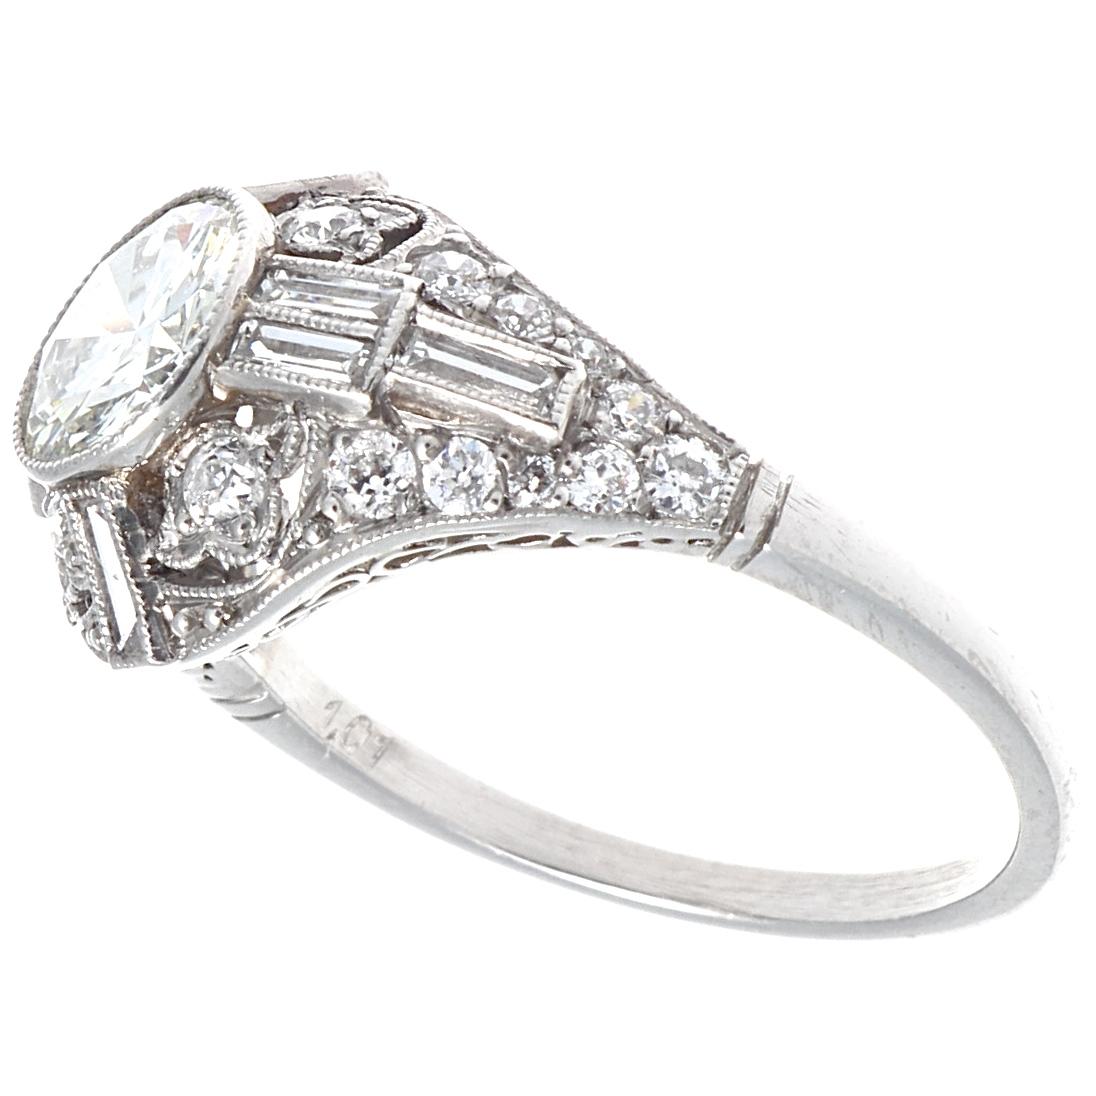 Everything you want in a platinum engagement ring. A beautiful 1 carat round brilliant diamond with accenting baguette cut diamonds and filigree design conspire to create a stunning ring with a shimmering presence. There are 8 baguette cut diamonds